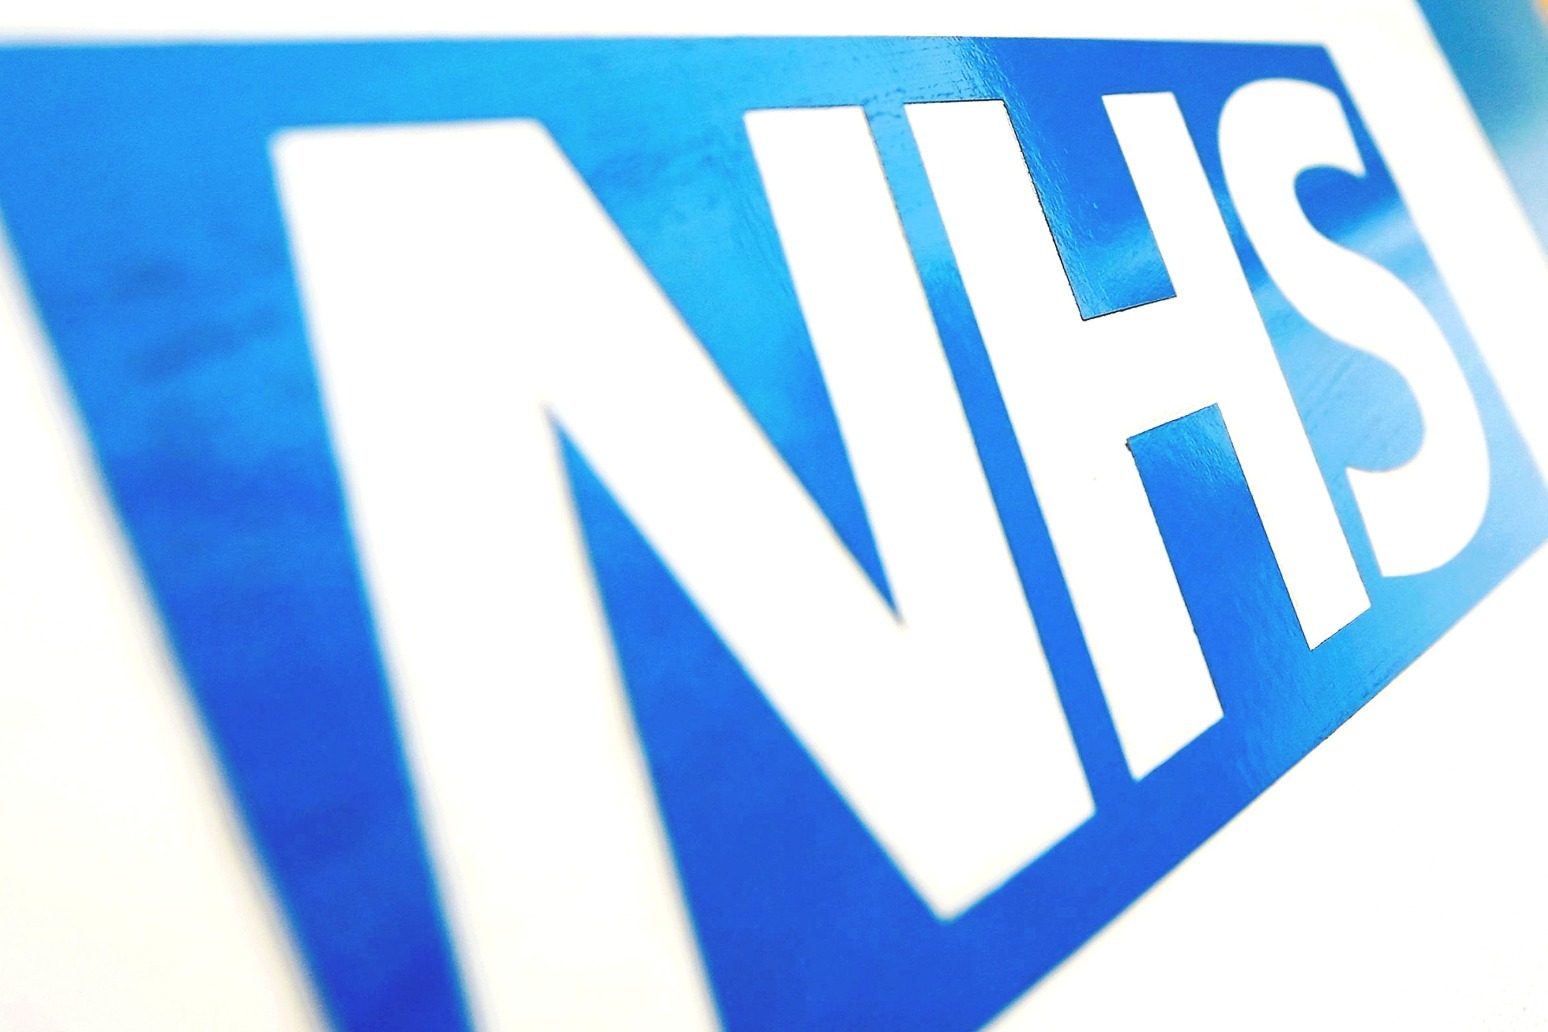 More than 13,000 NHS operations cancelled in last two months 